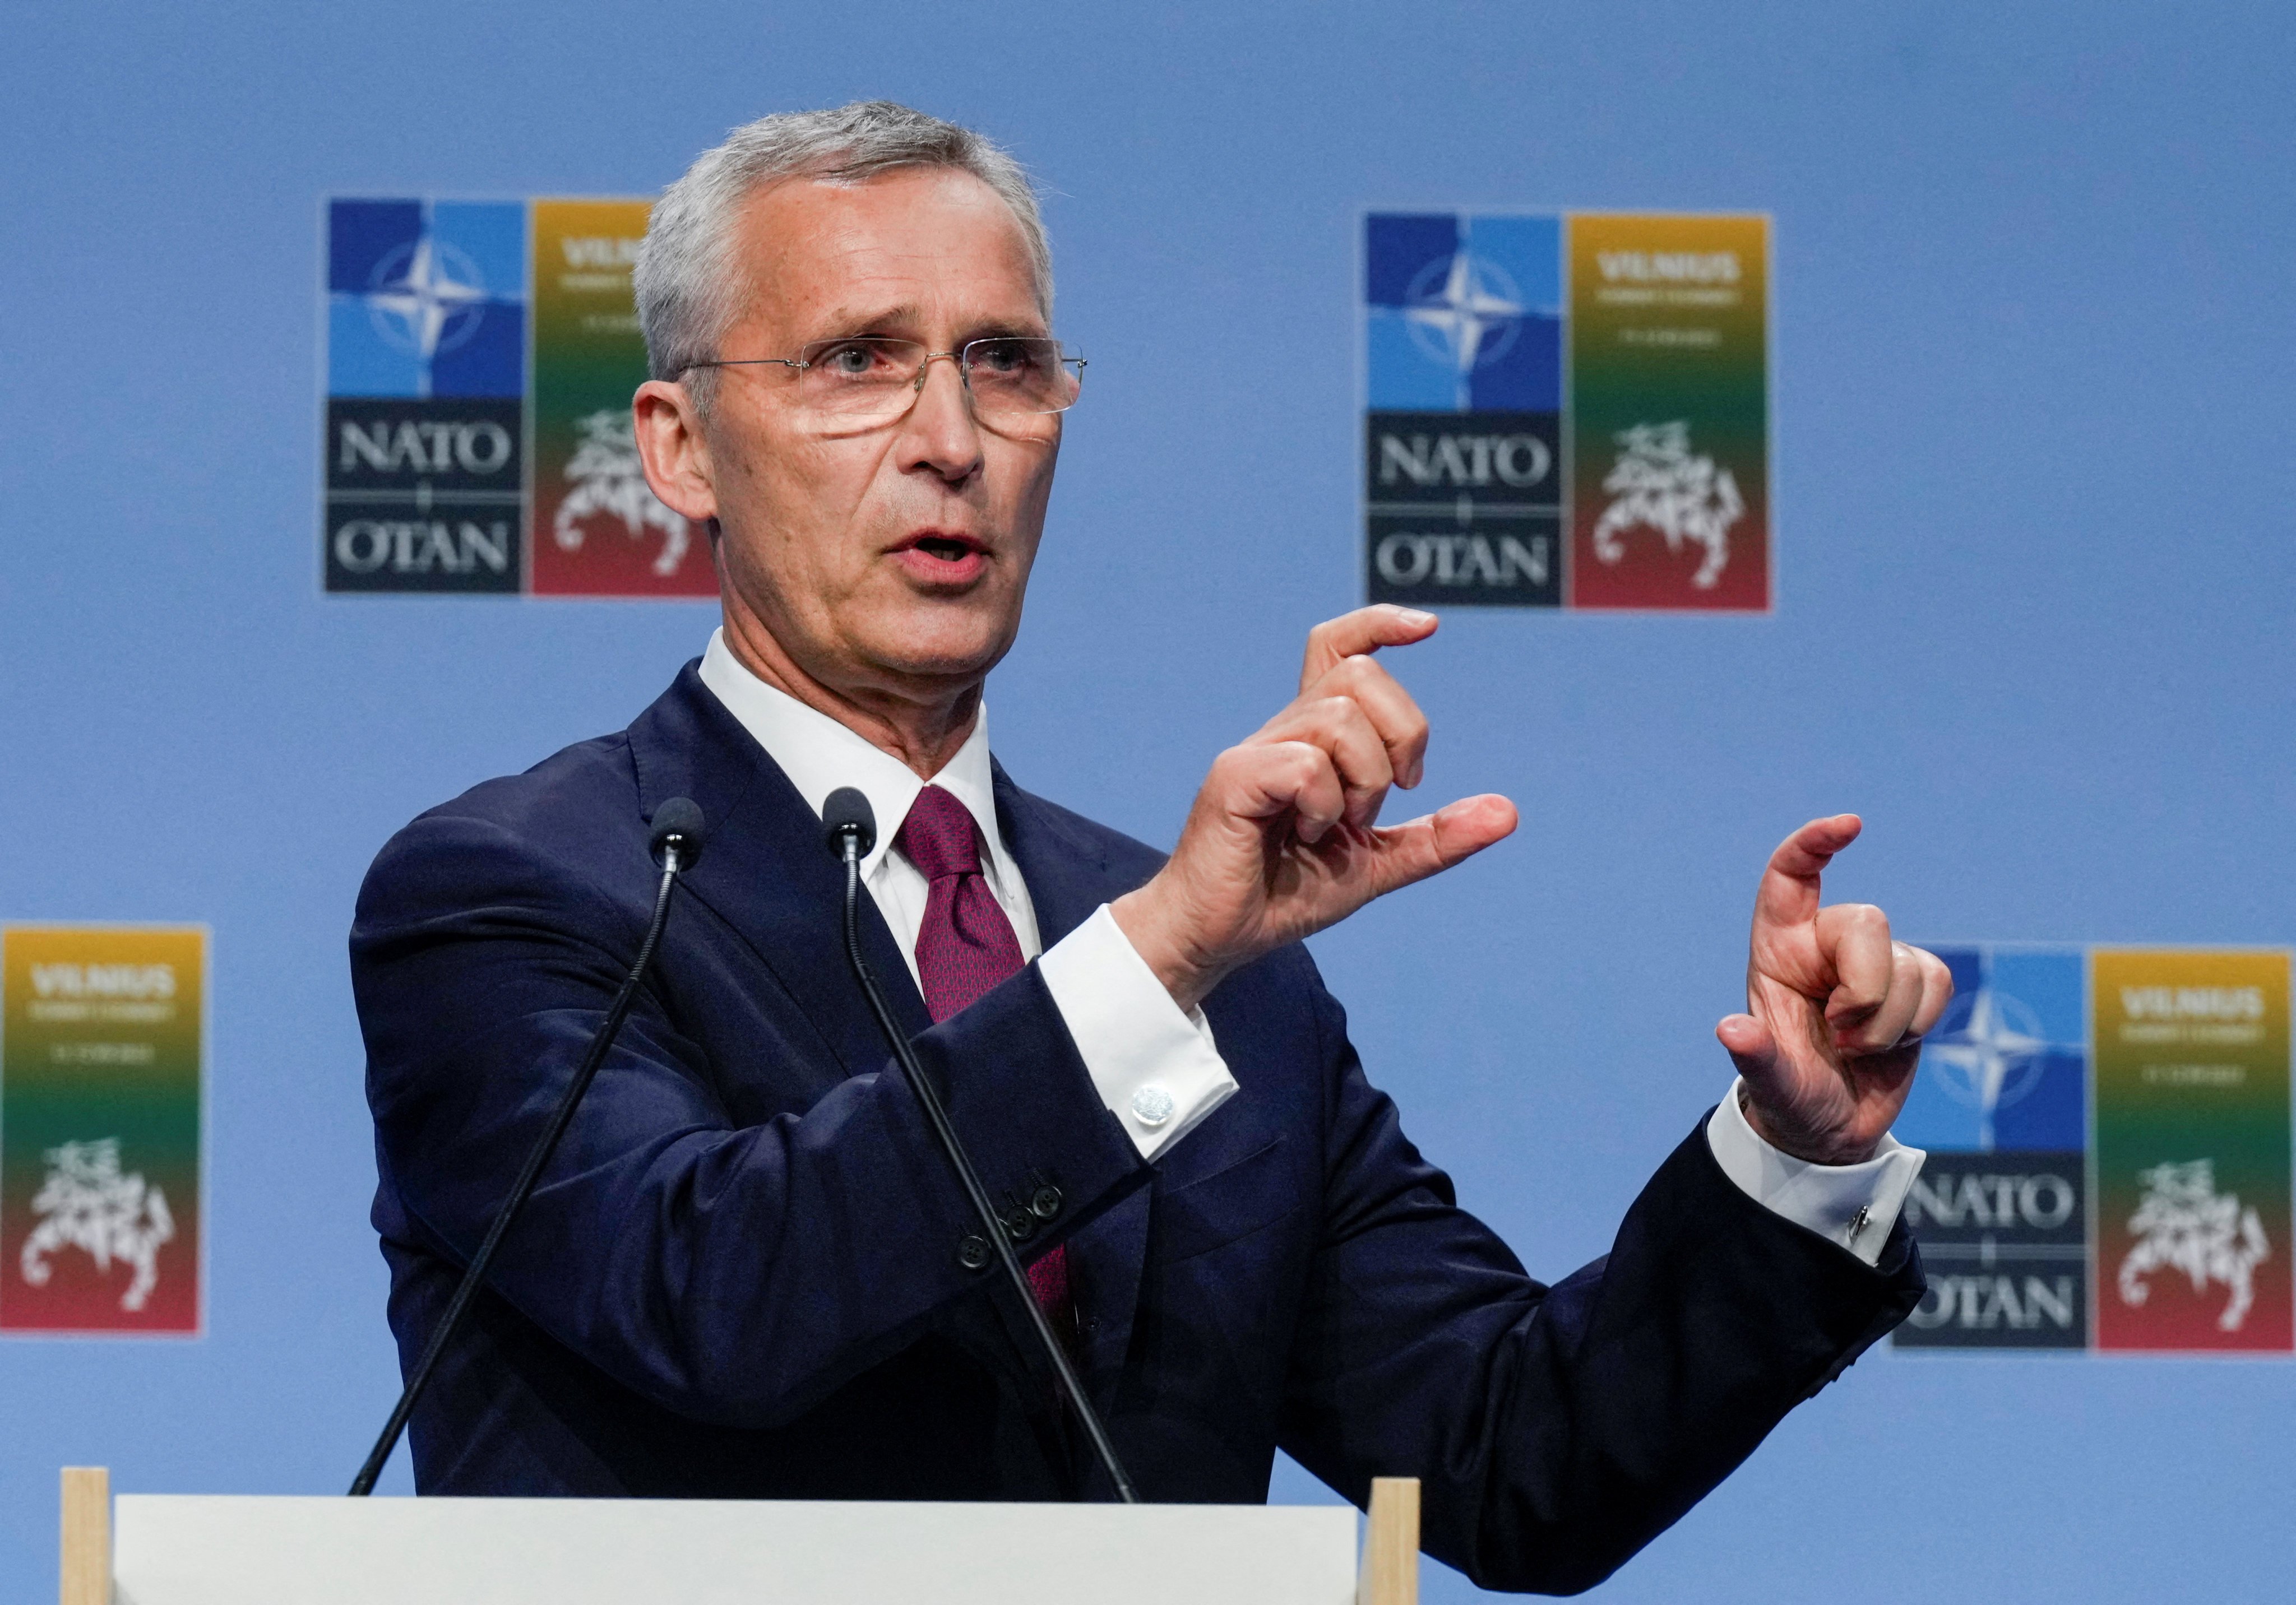 Nato Secretary General Jens Stoltenberg speaks at a press conference during a Nato meeting in Vilnius, Lithuania on Tuesday. Photo: Reuters